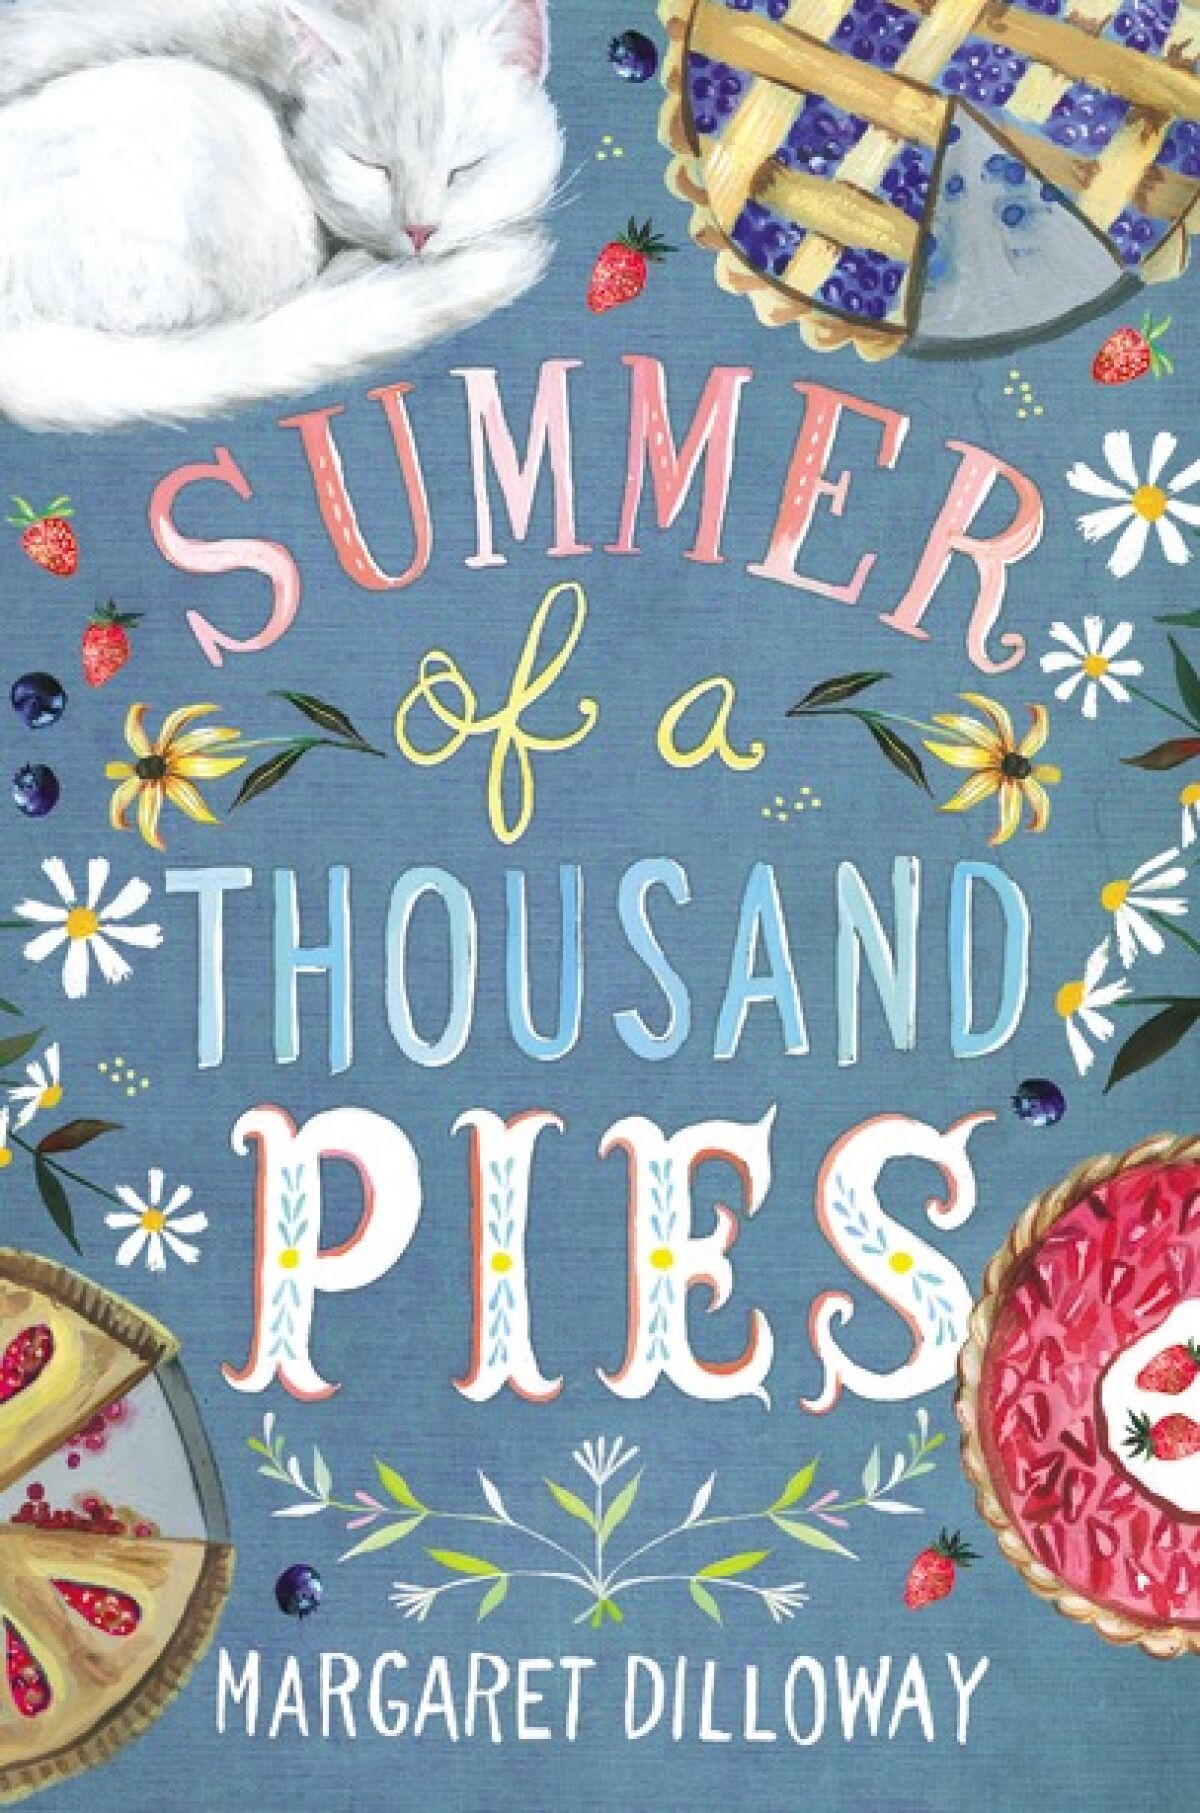 The book cover for "Summer of a Thousand Pies" by Margaret Dilloway